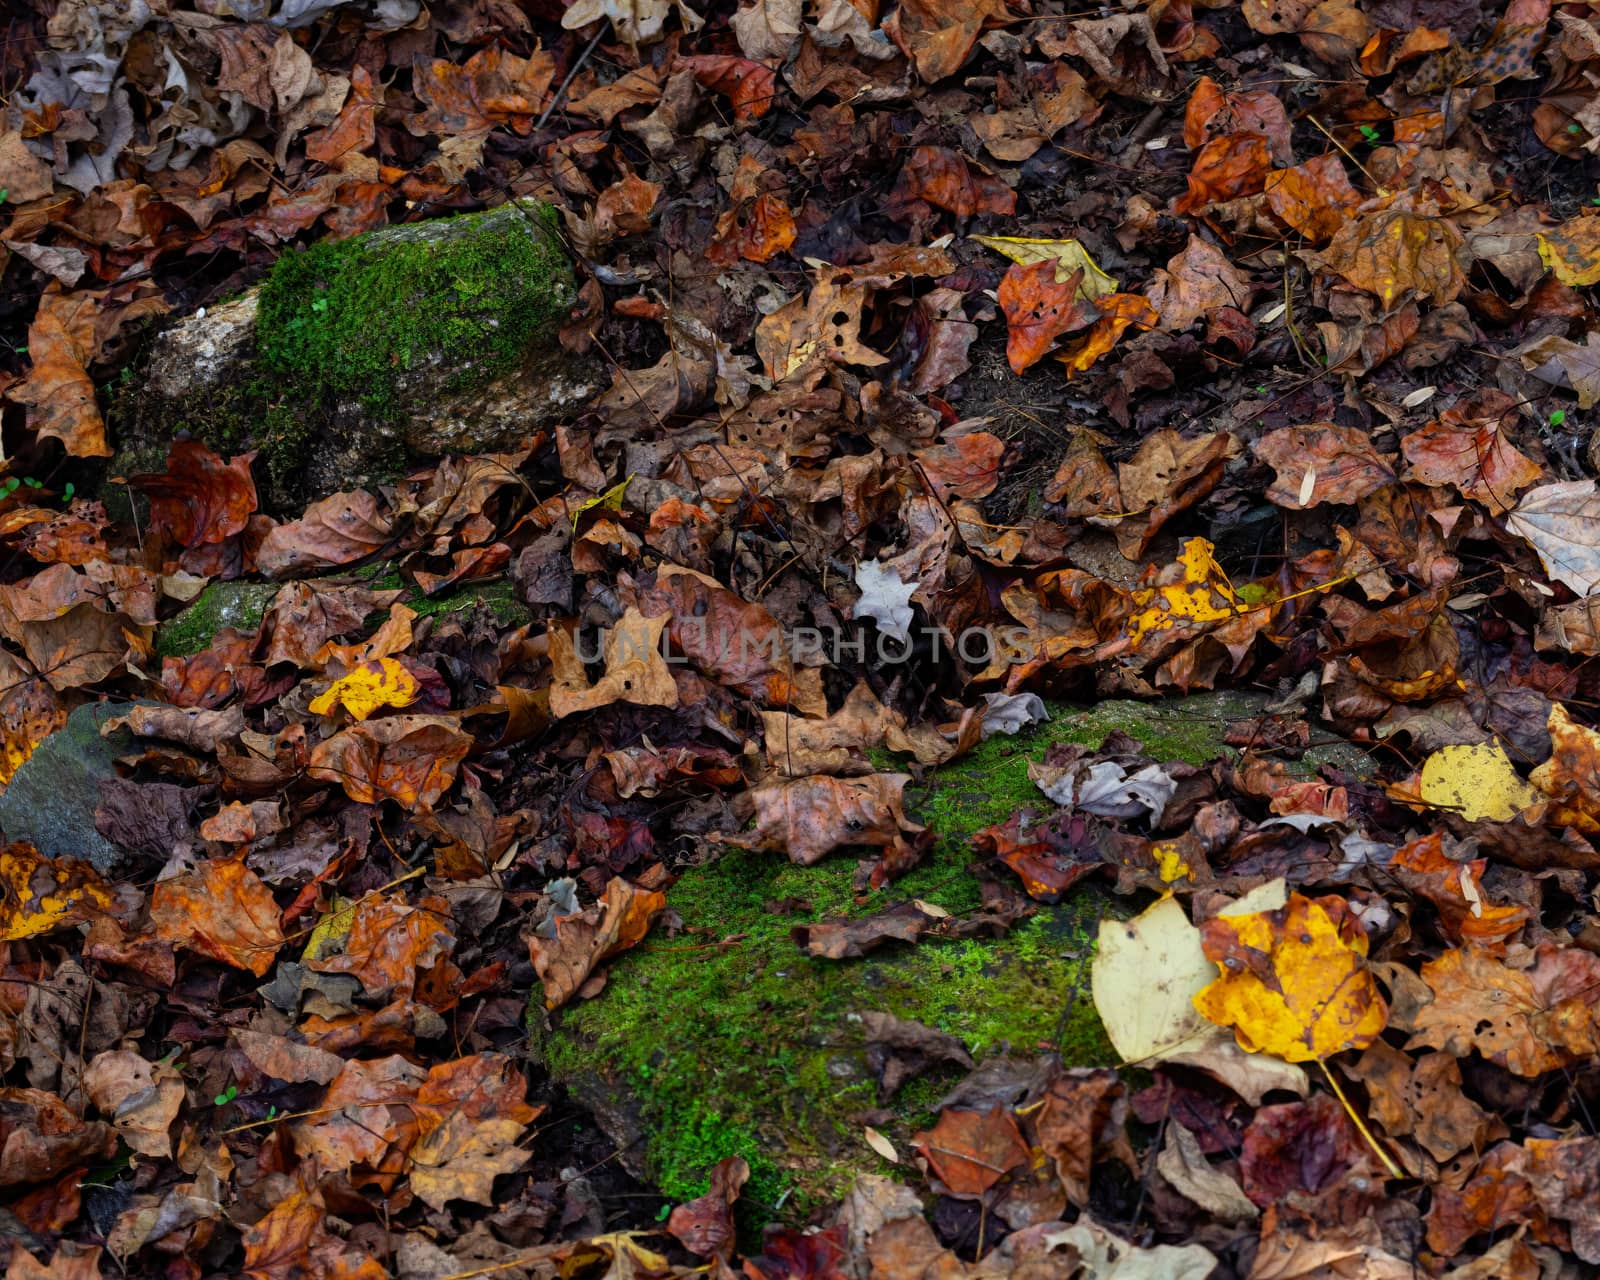 Wet fallen leaves are strewn on the forest floor.